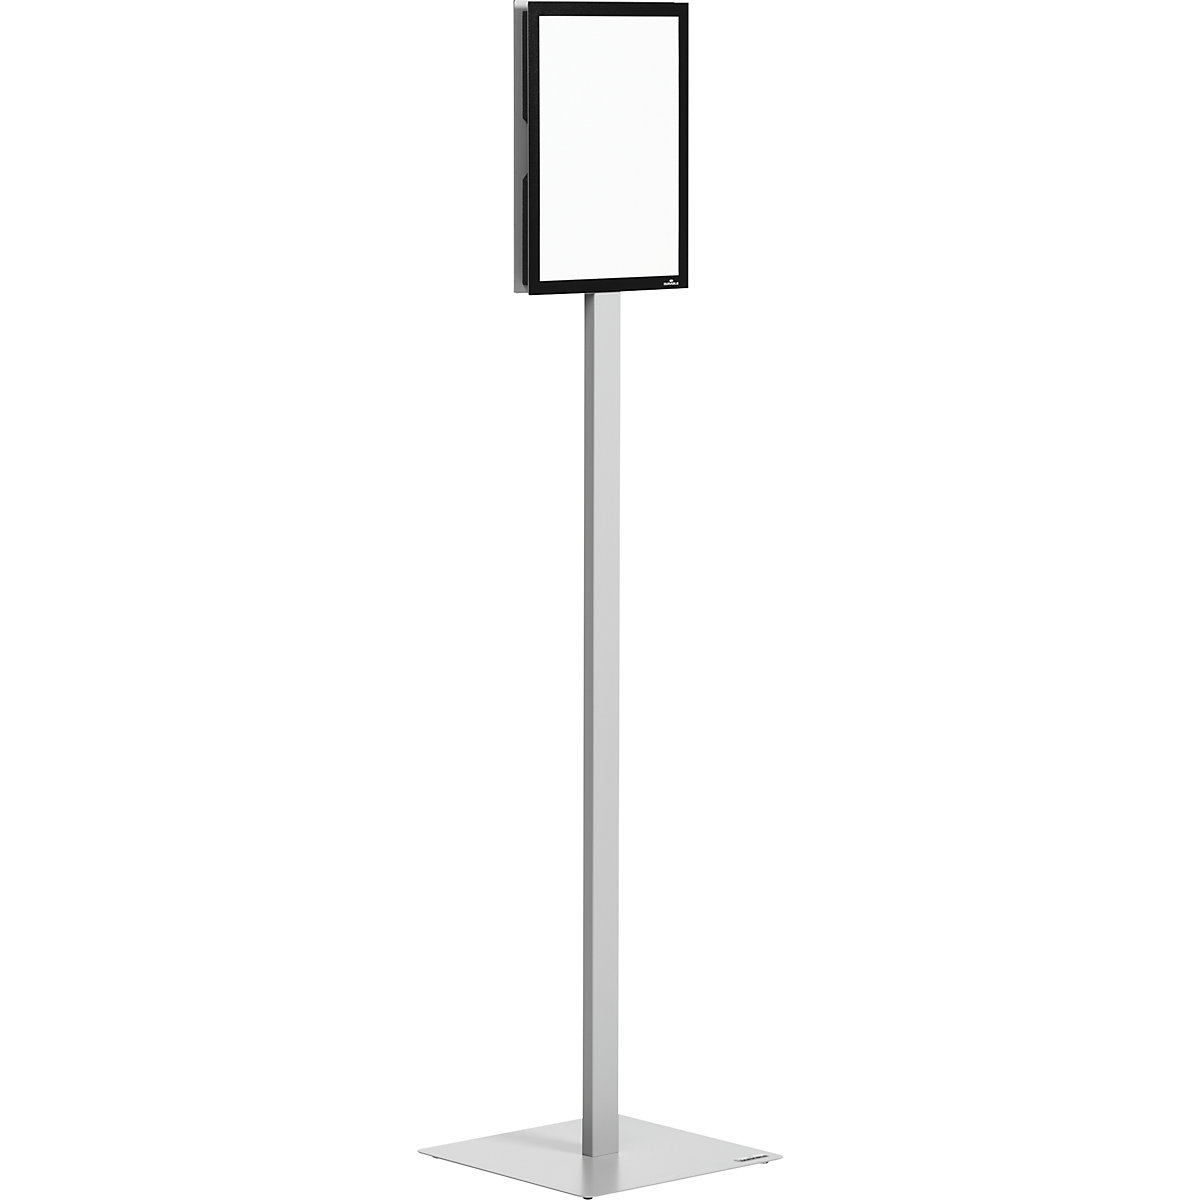 INFO STAND BASIC floor stand – DURABLE